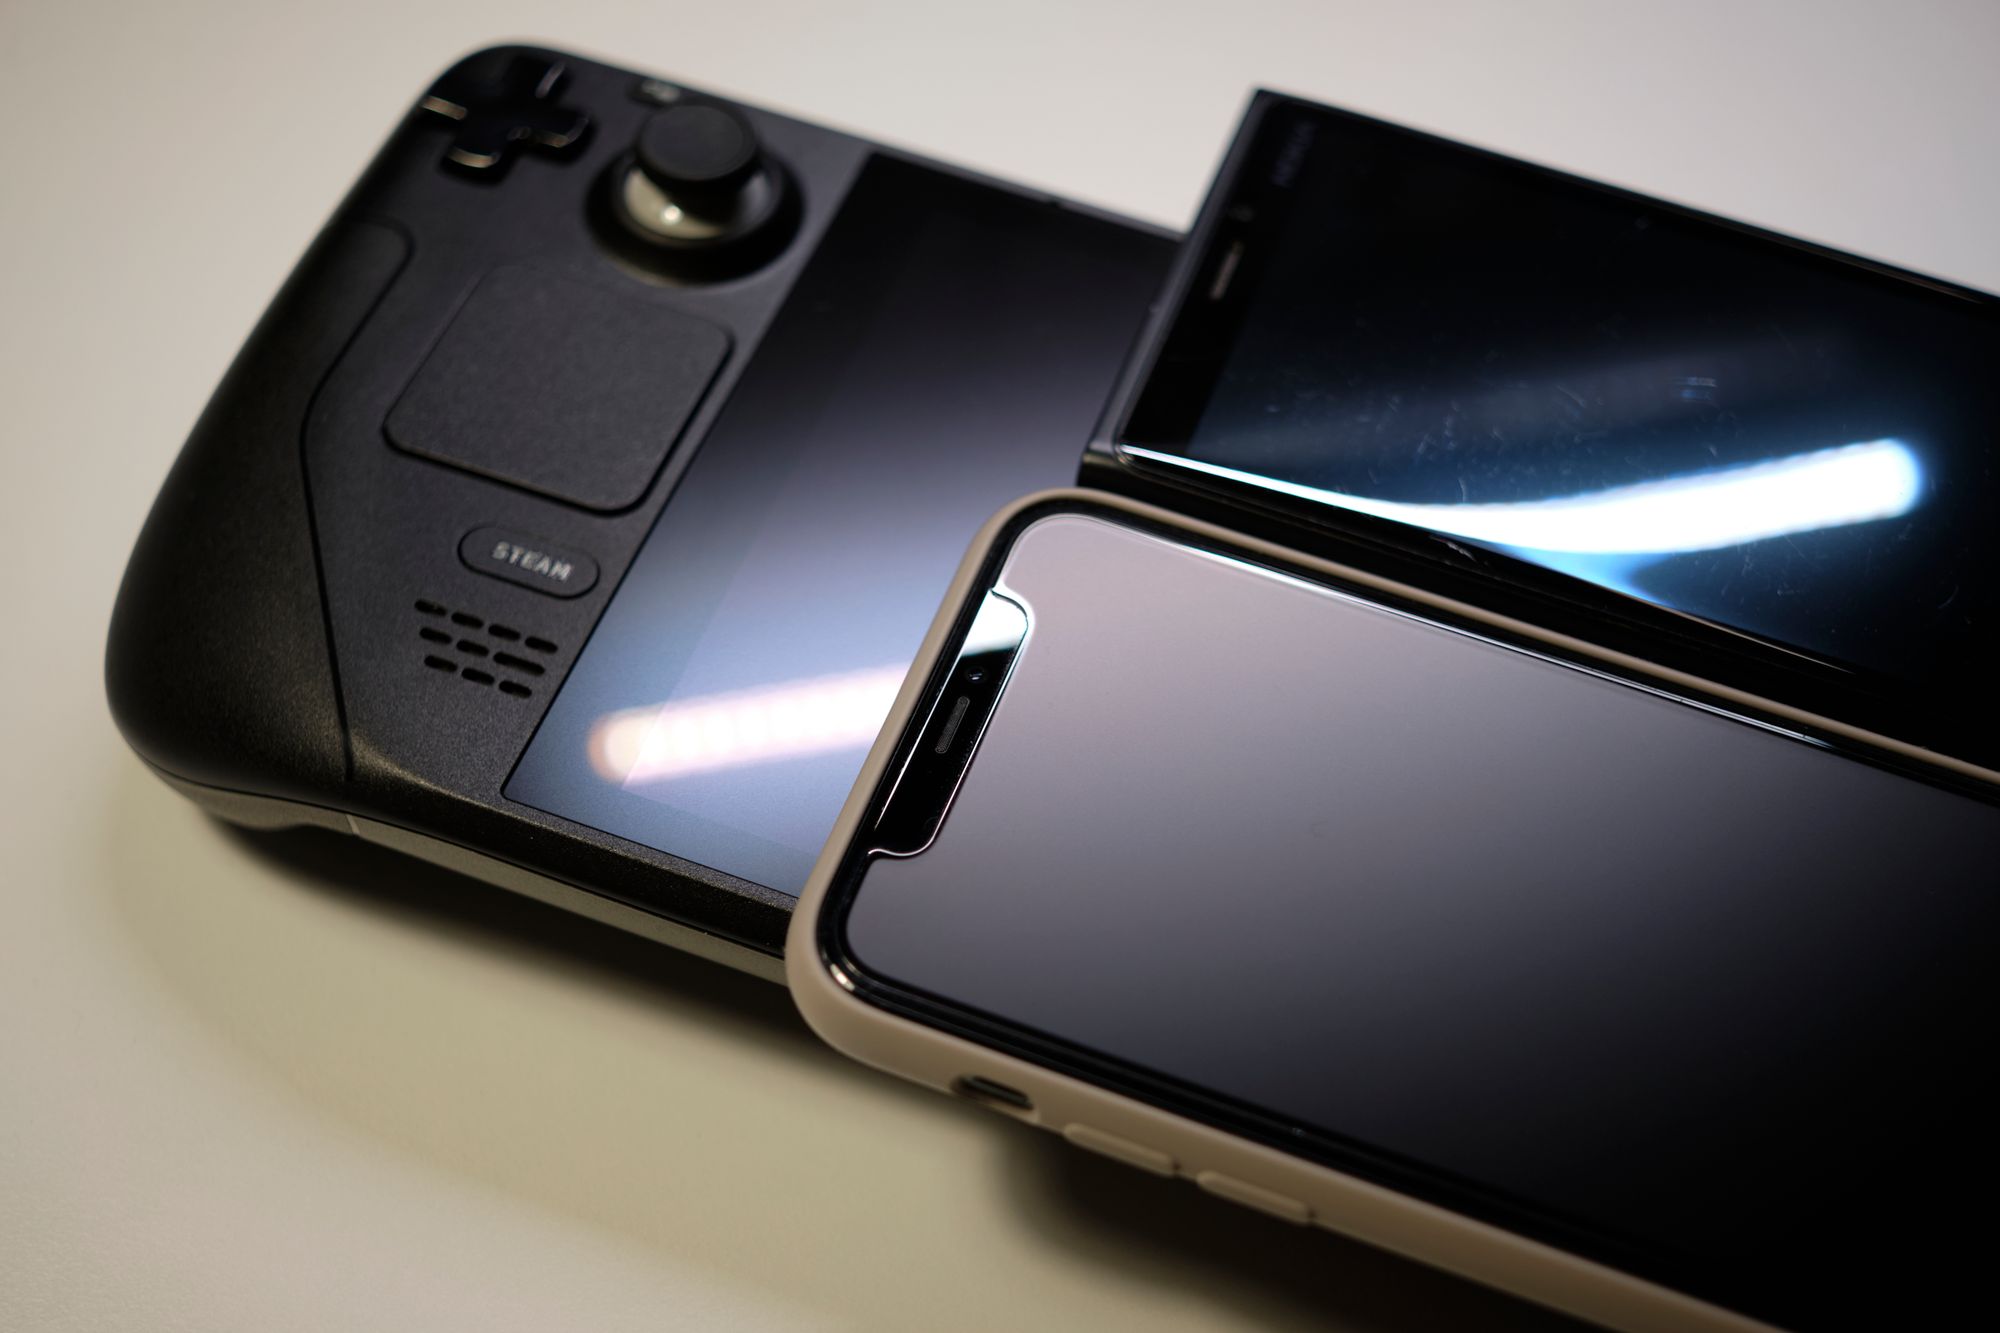 Showing a Steam Deck, with an iPhone with a matte screen protector (11 Pro) and a old Nokia phone (Lumia 920) on top. And all 3 devices are angled to try to reflect a bar of LED light, in which it shows different level of reflectiveness. 